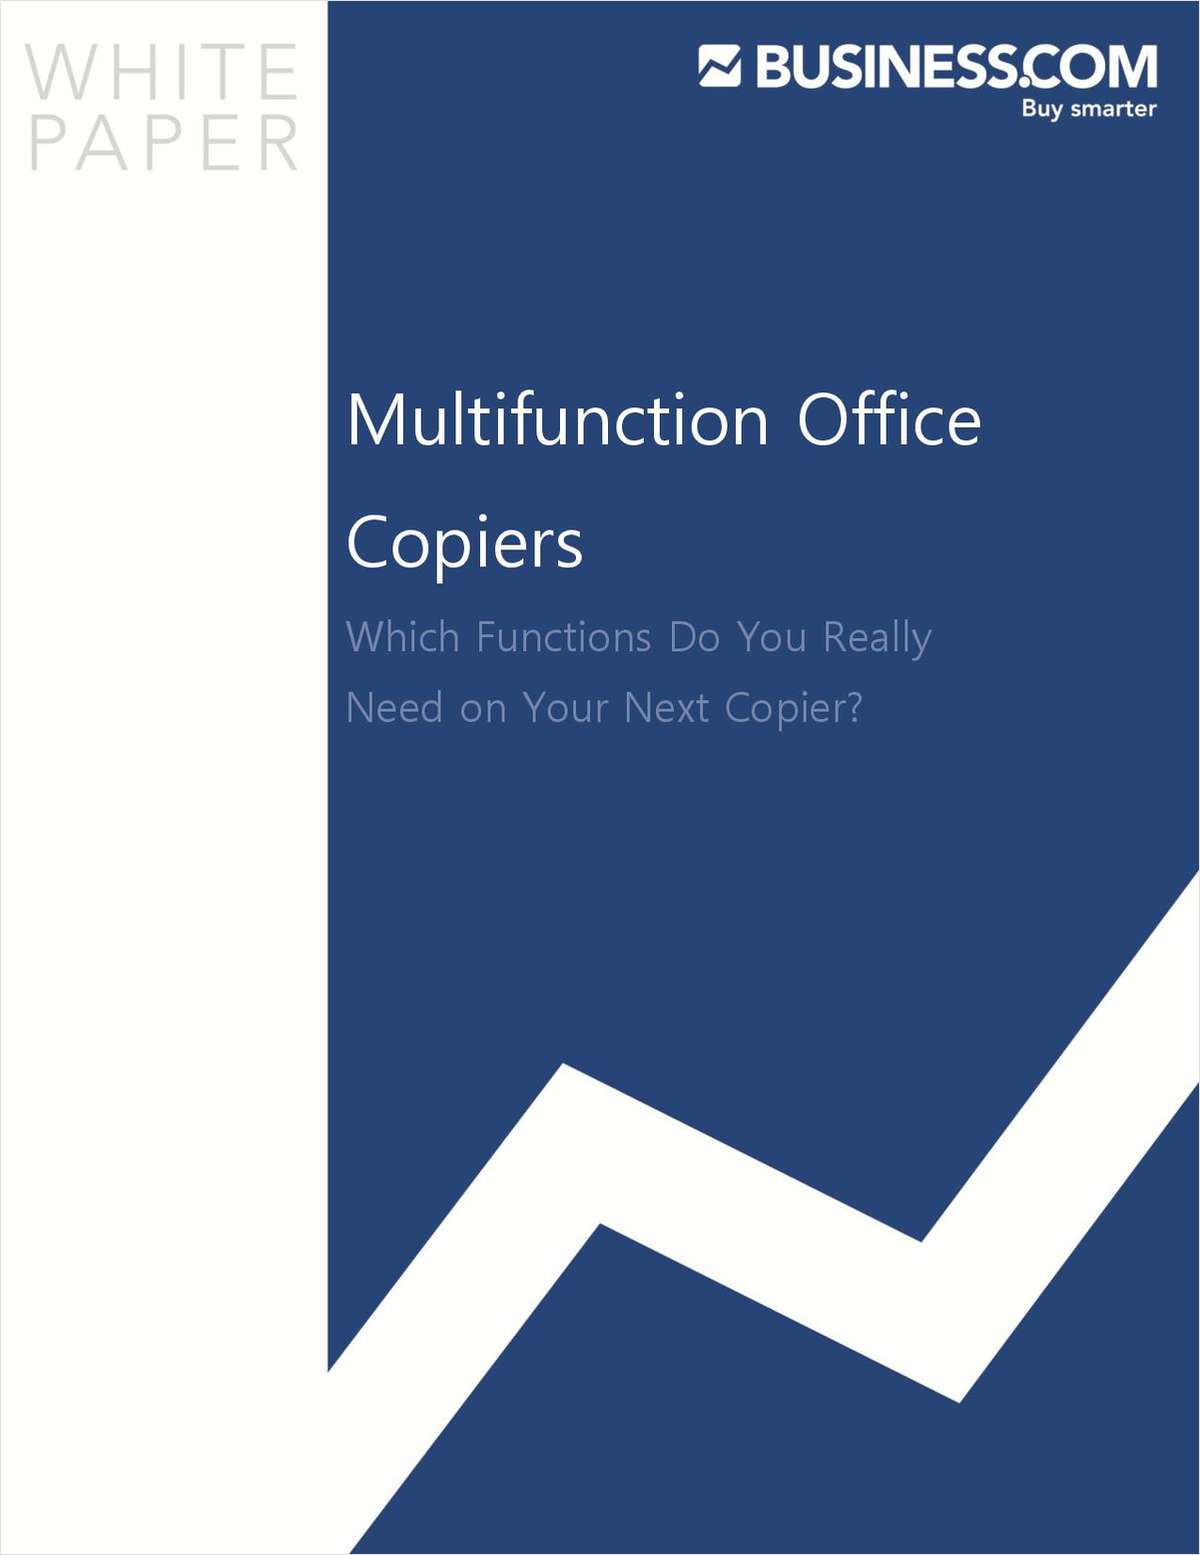 Best Practices For Choosing the Right Copier With Functions You Really Need